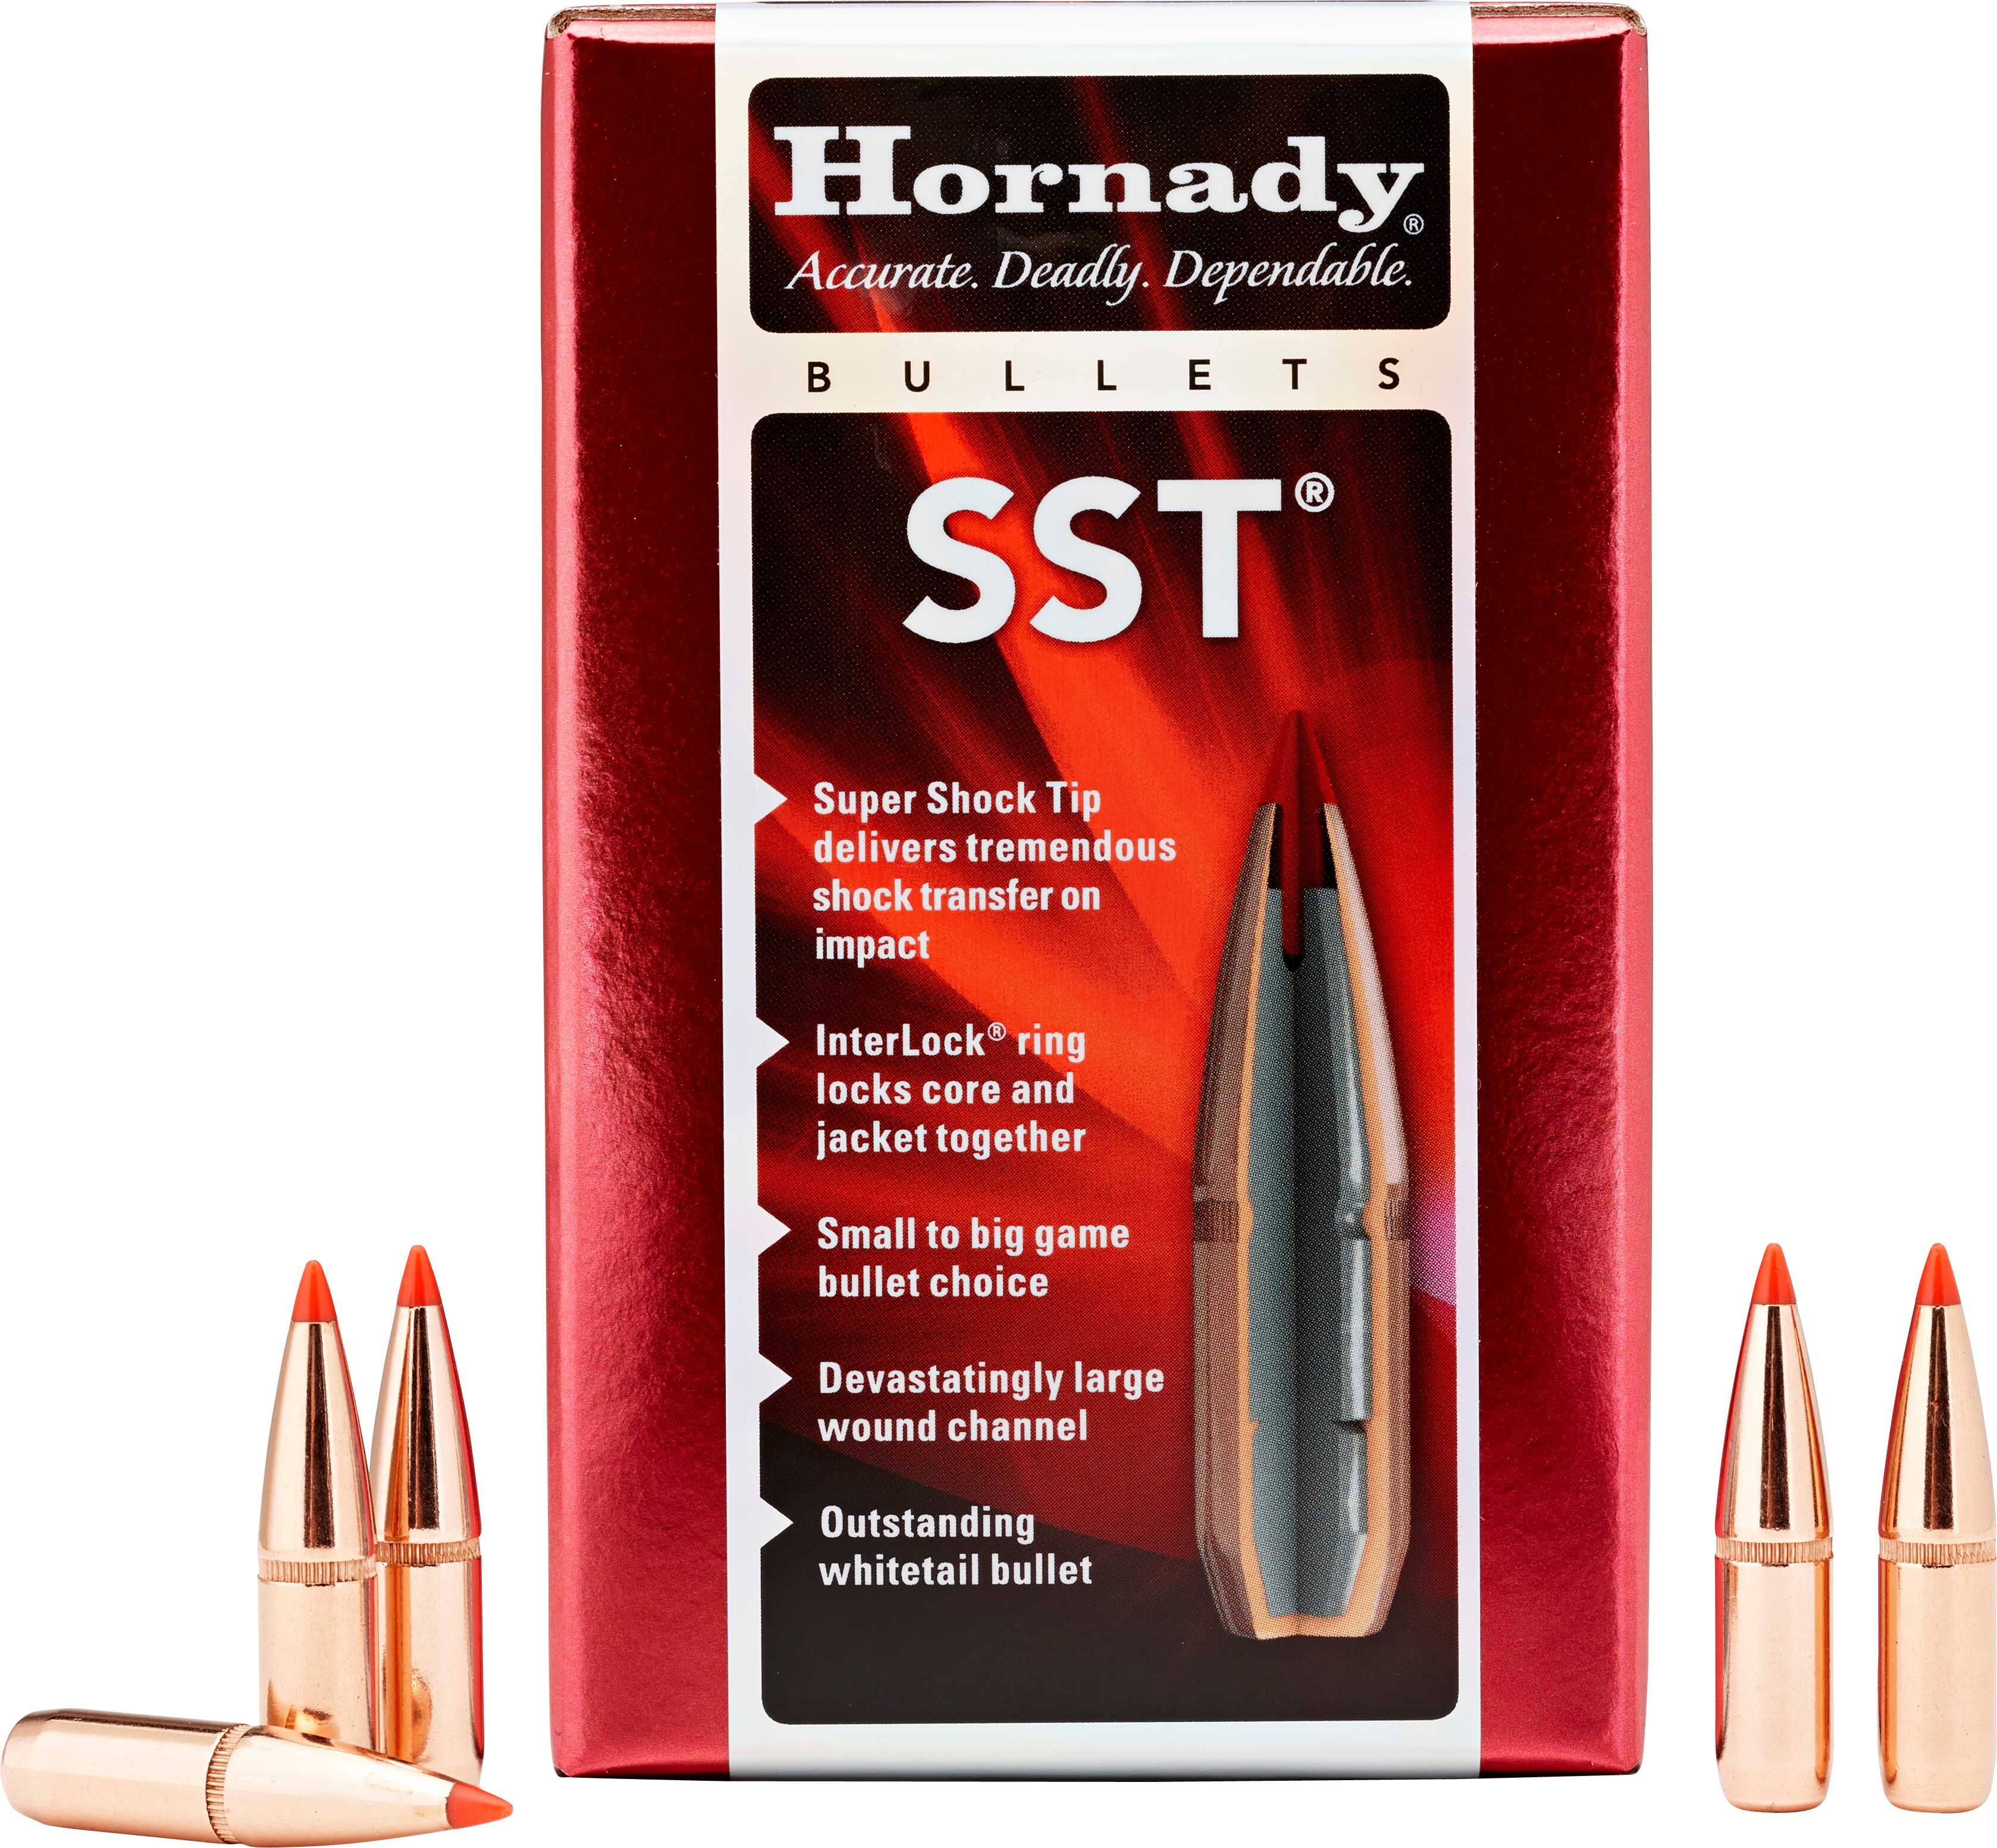 Hornady 270 Caliber .277 Diameter 130 Grain Super Shock Tipped With Cannelure 100 Count